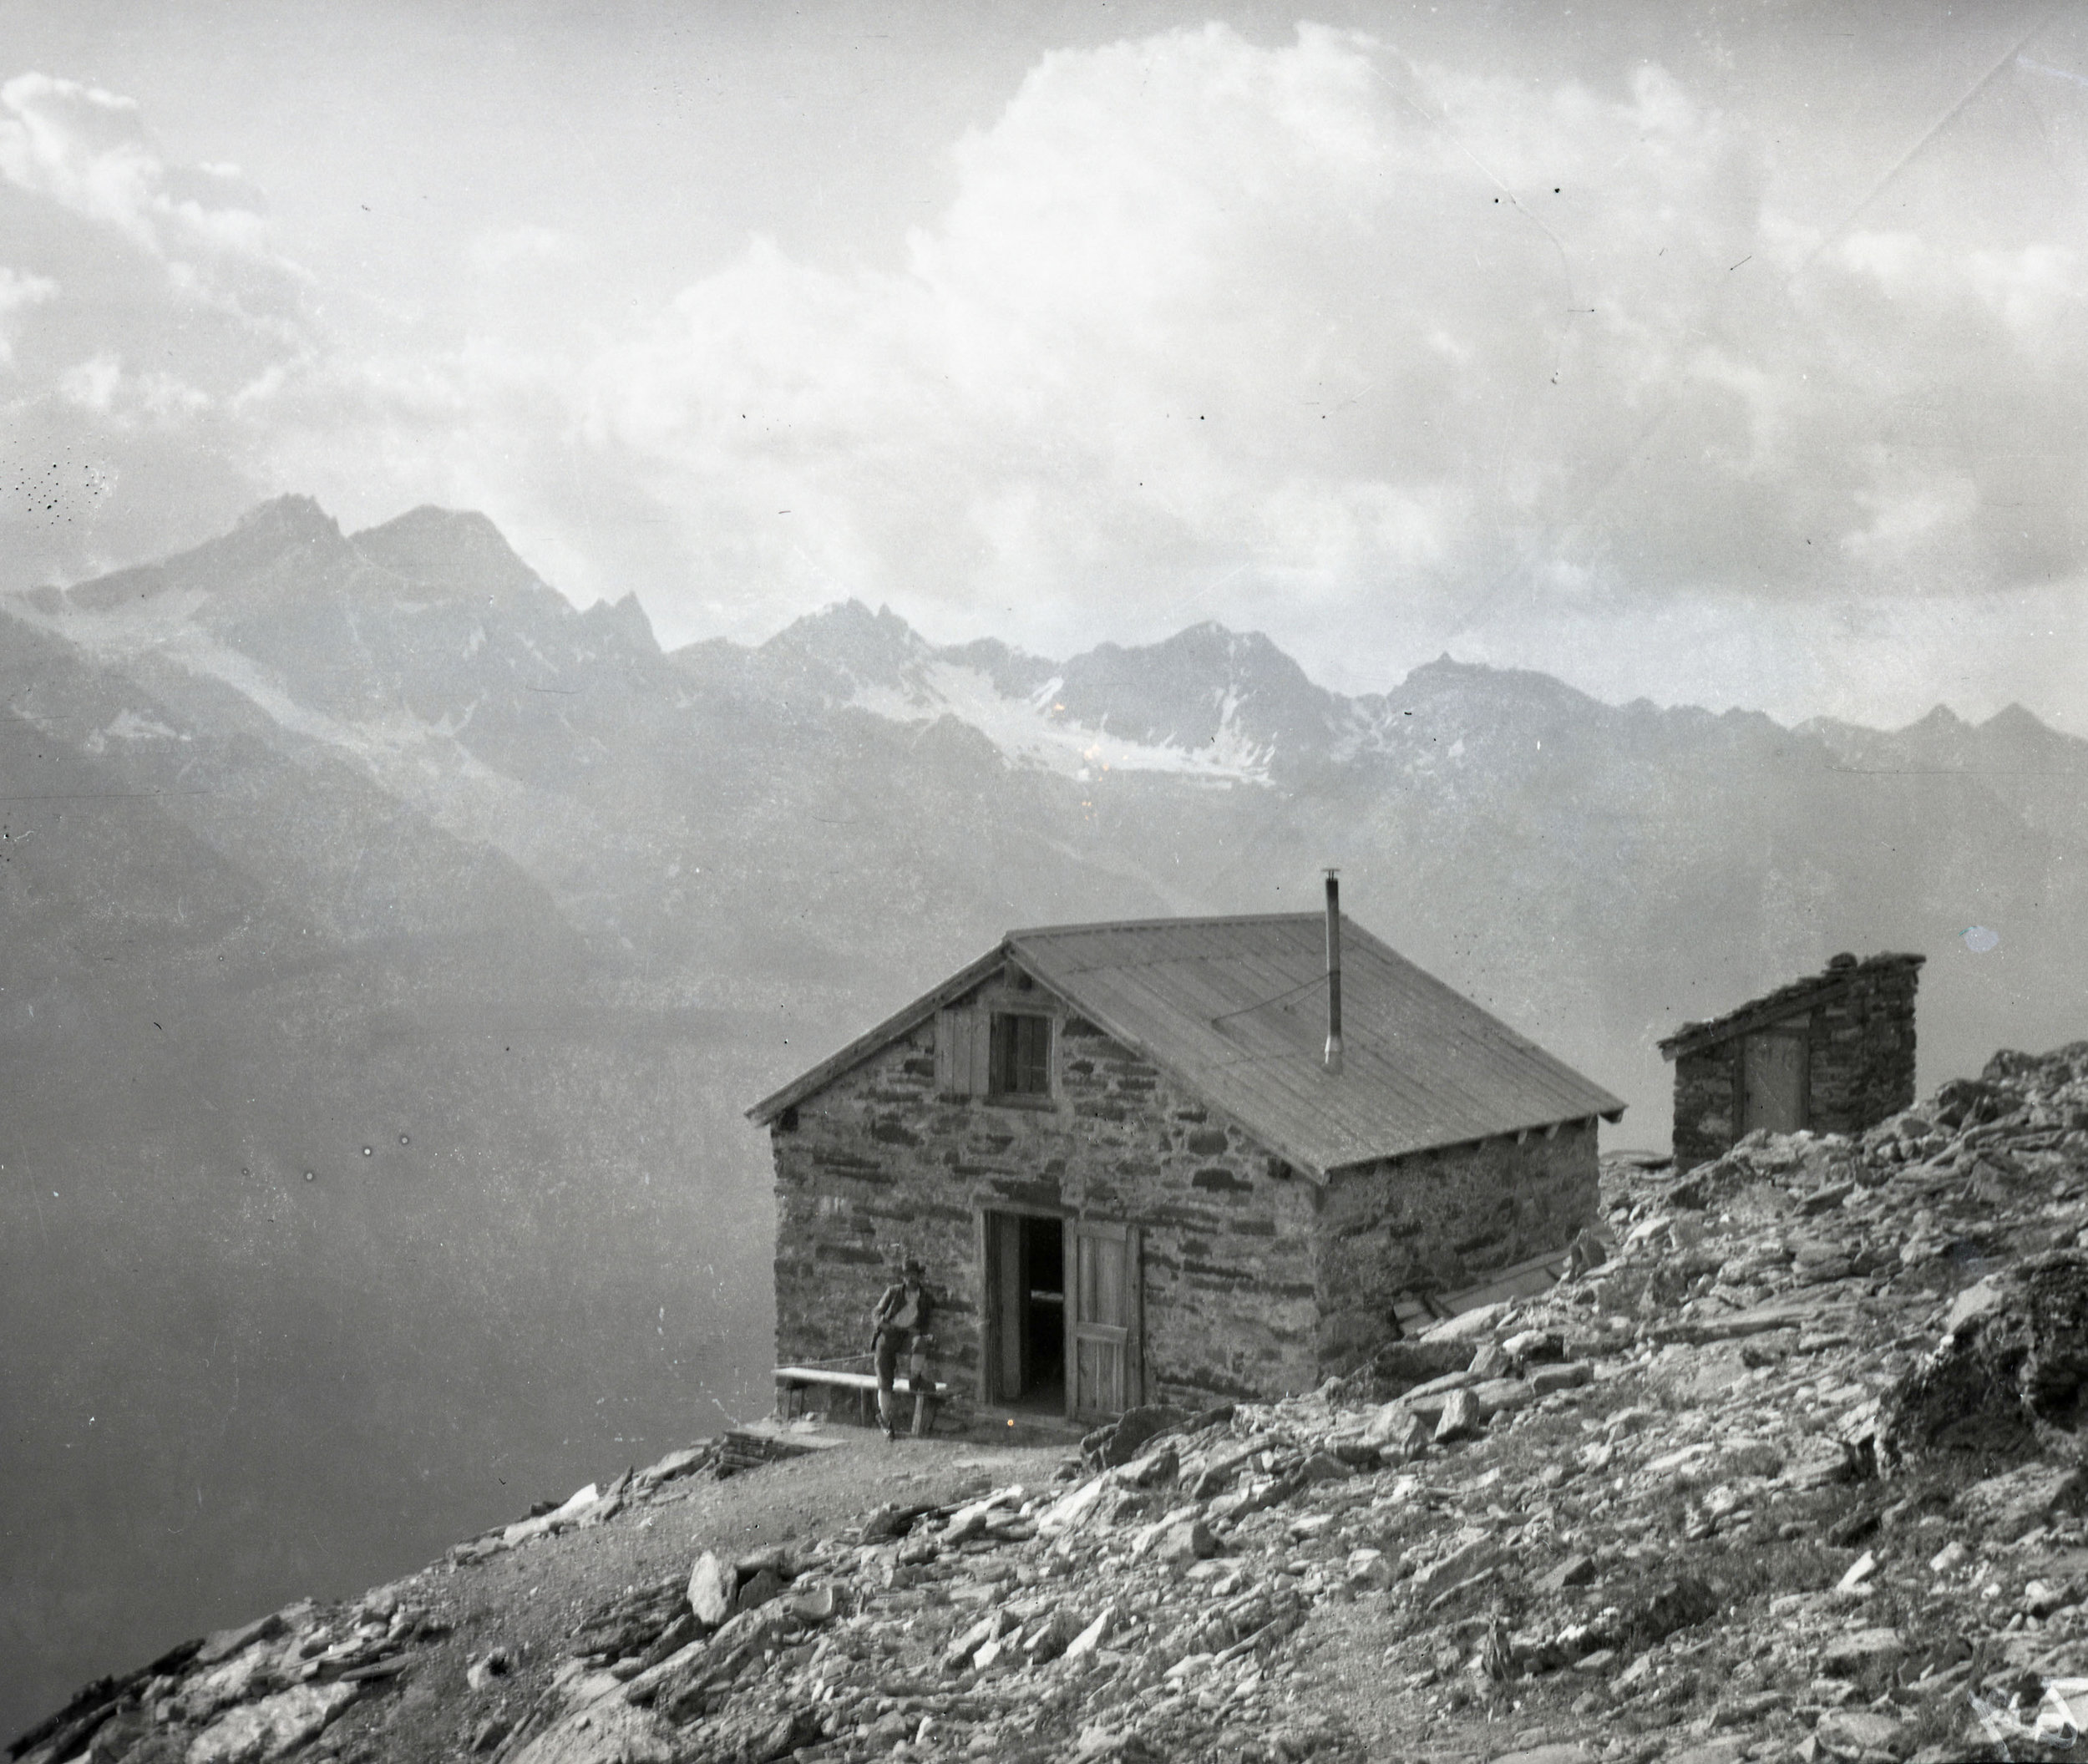  A hut in the Alps 